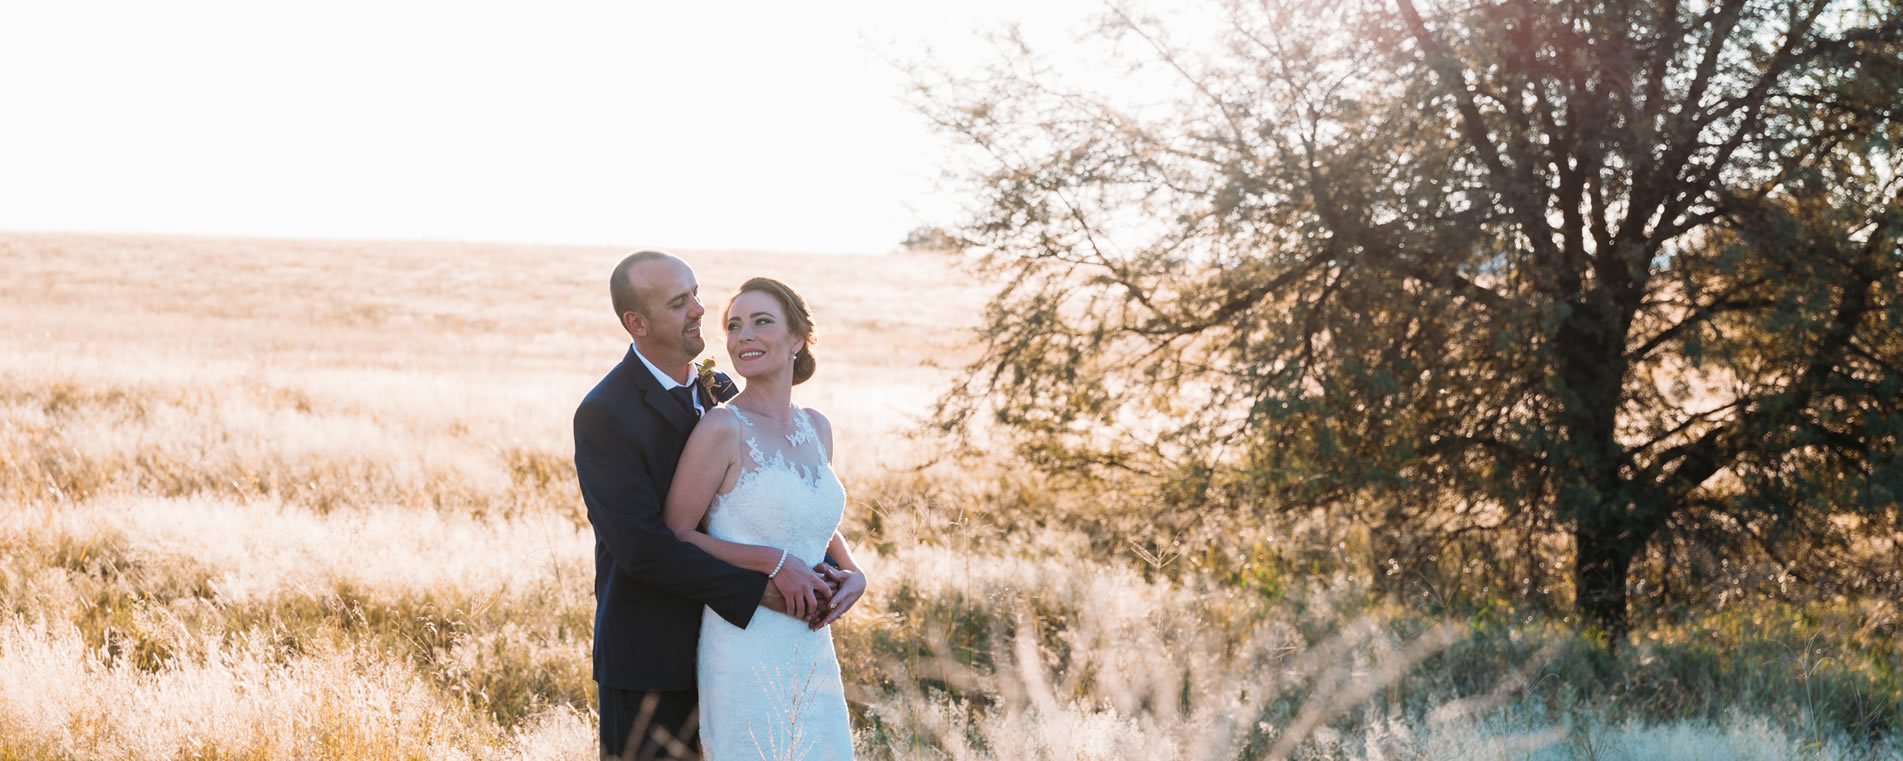 Wedding Photography Packages Bloemfontein